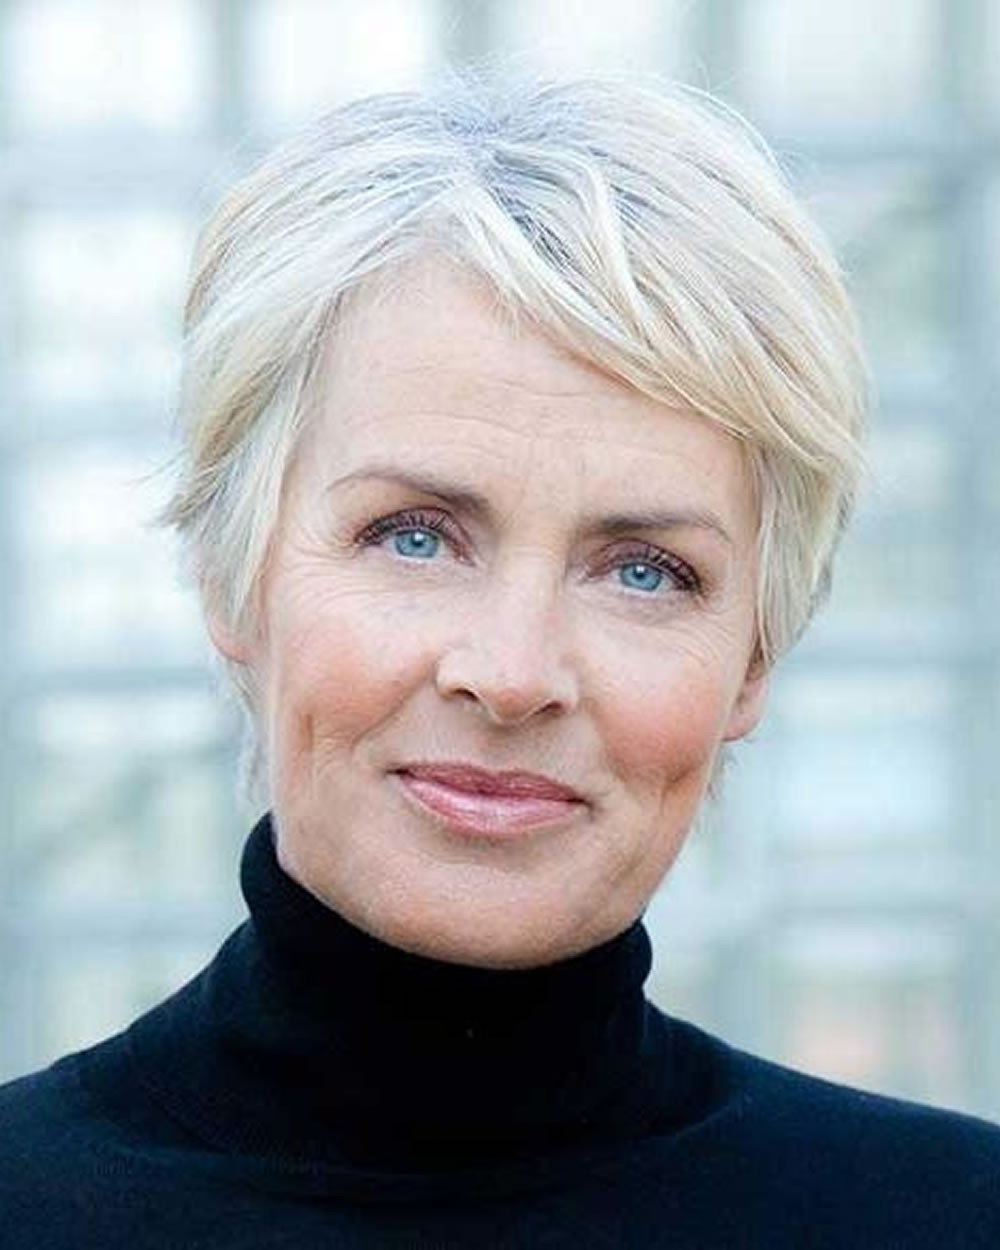 Hairstyles For Elderly Women
 Older women’s short hairstyles and hair colors for 2019